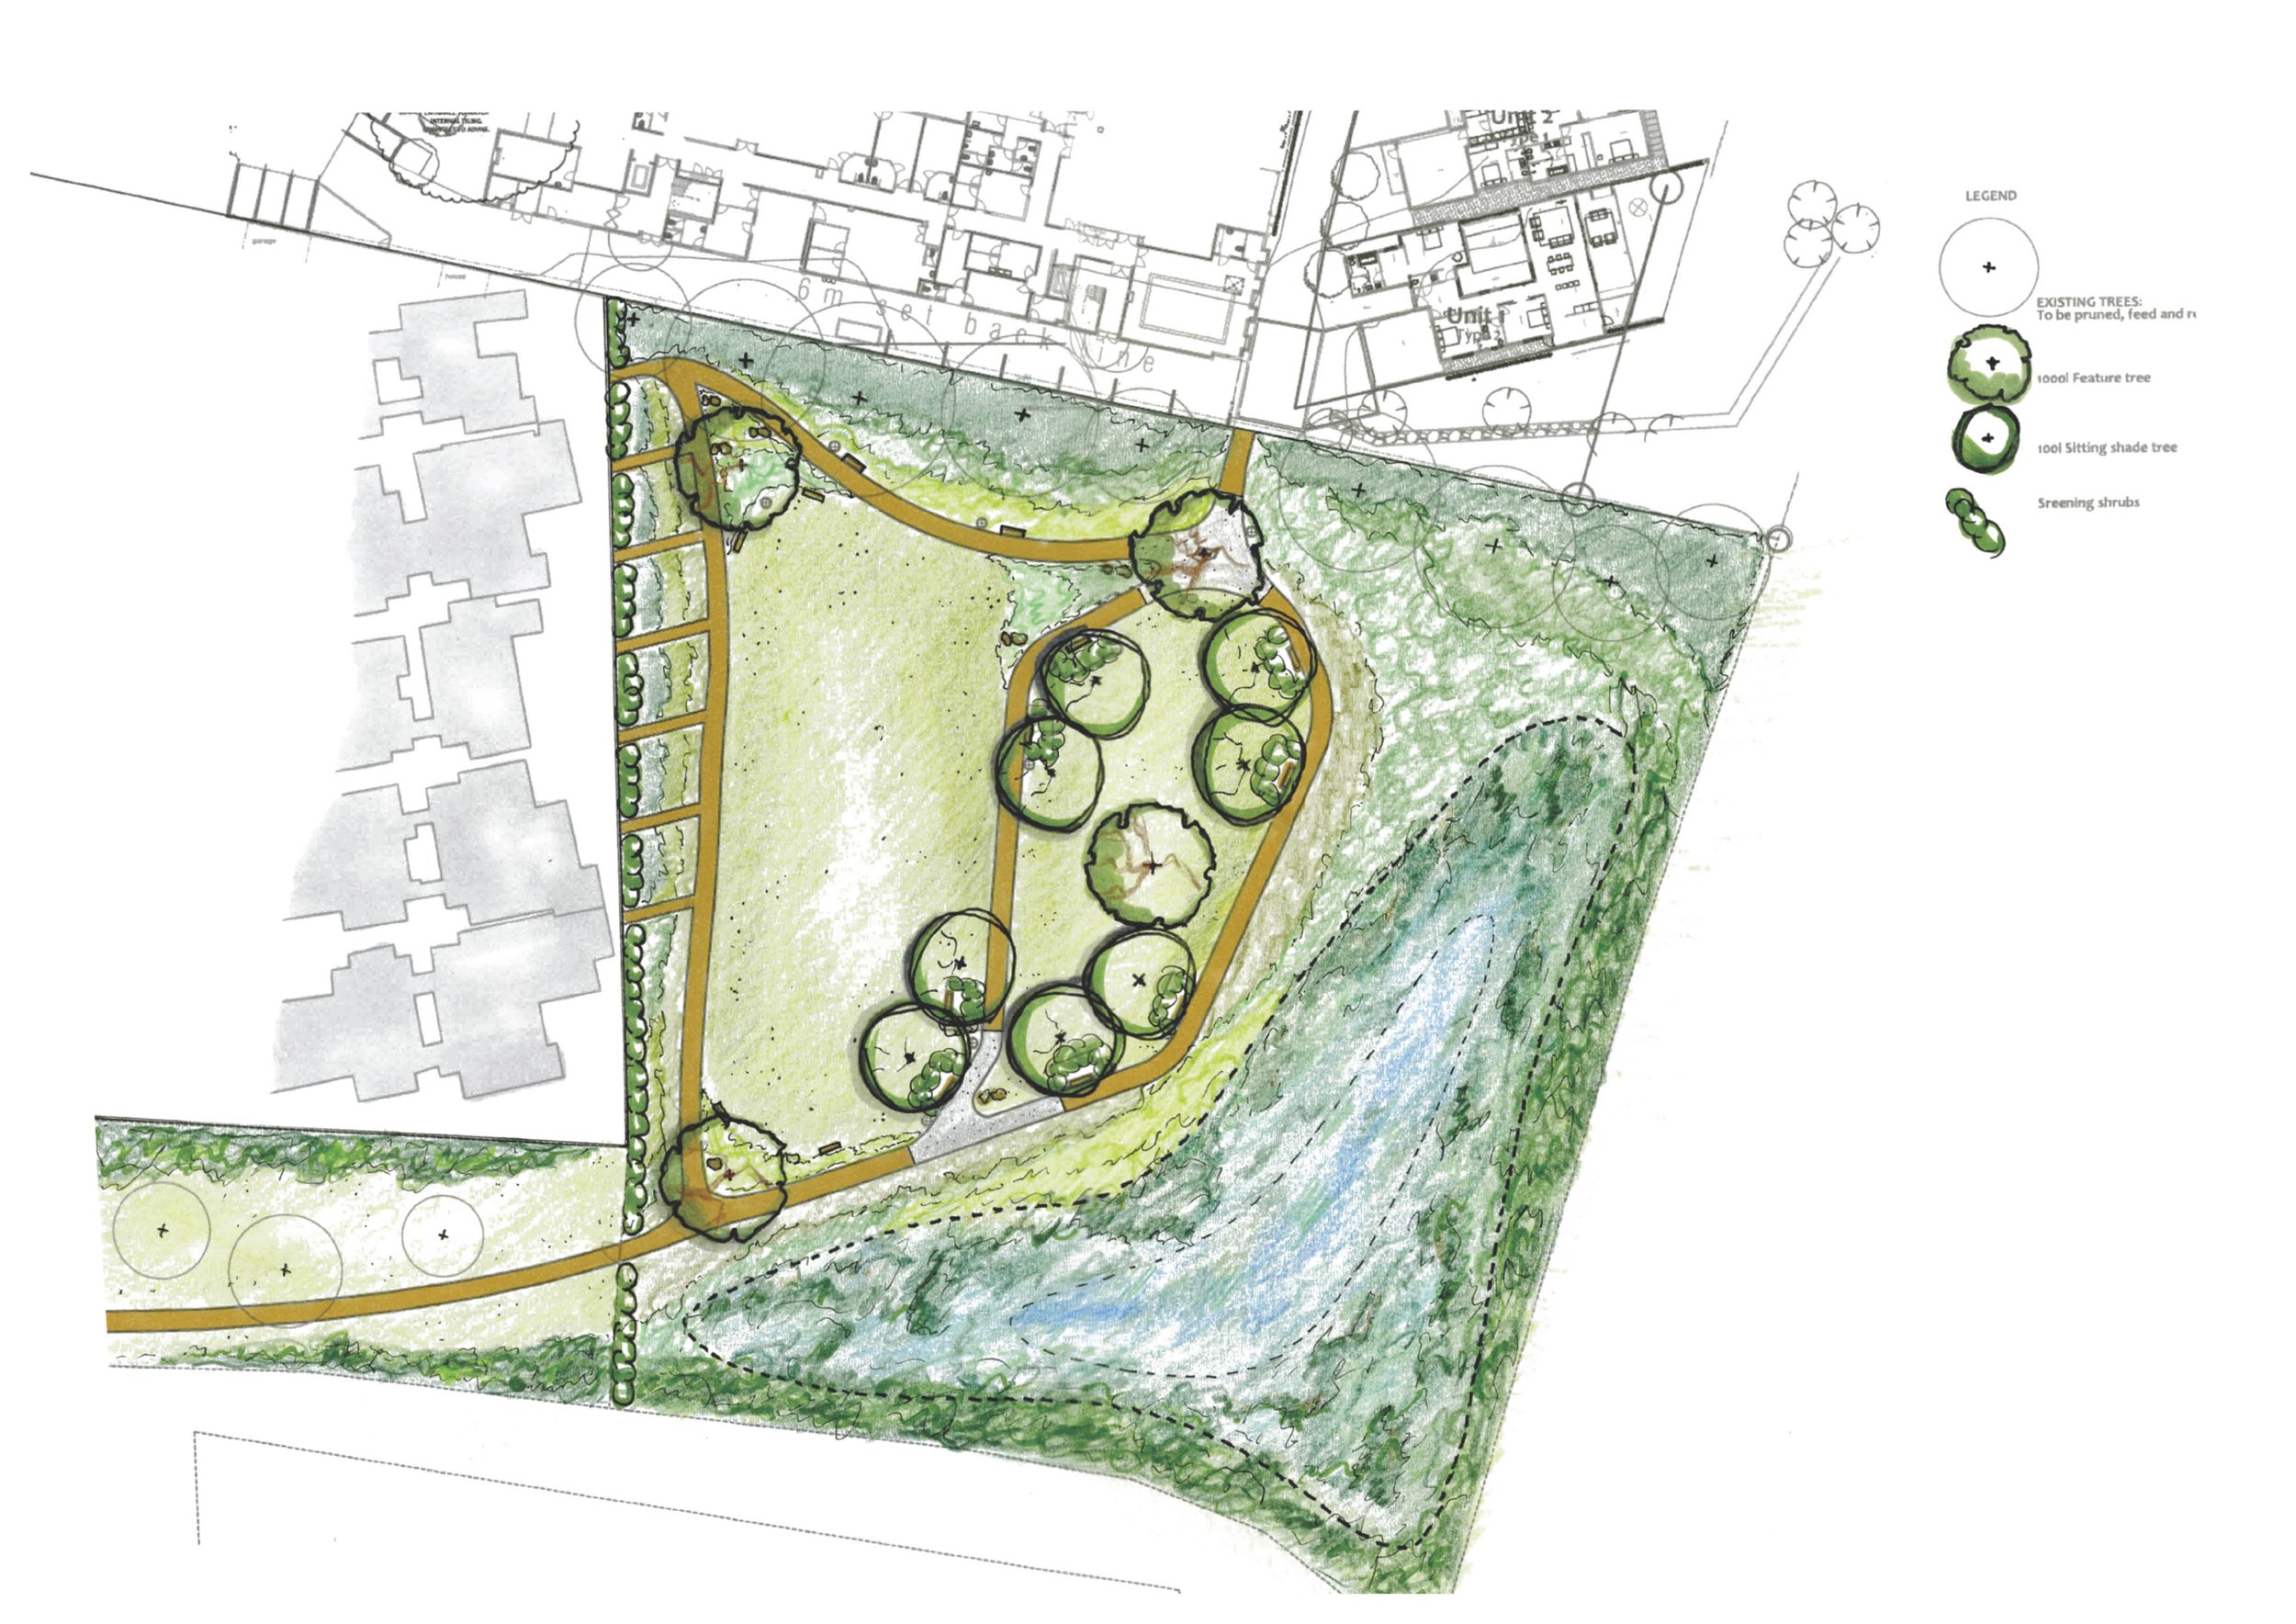  In addition to the scope of works, Terra+ were appointed to design the adjacent park. 